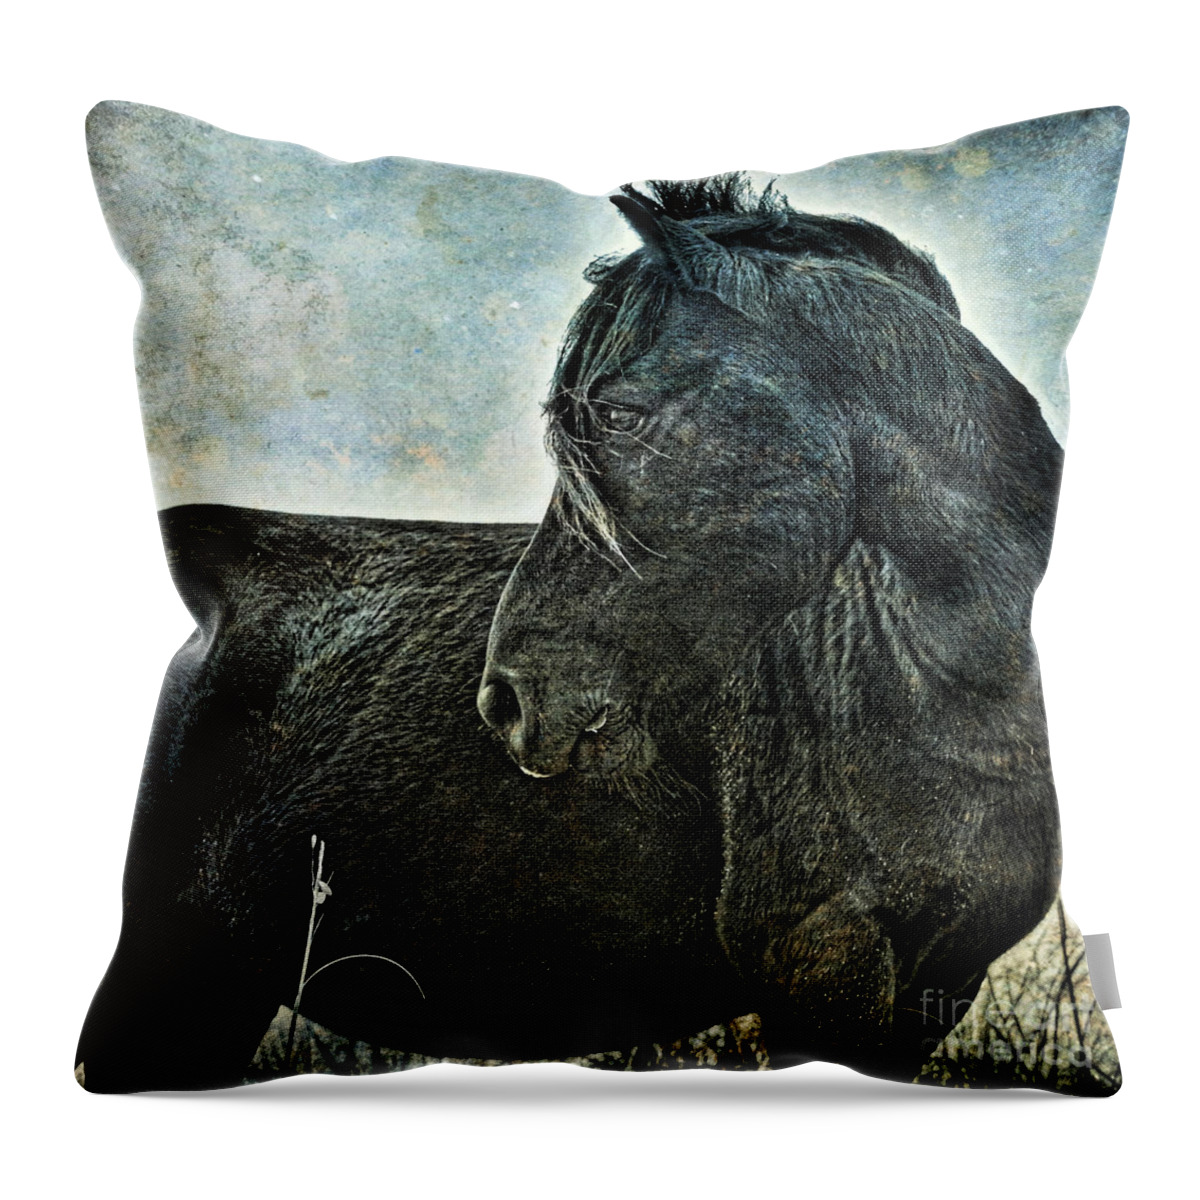 Horse Throw Pillow featuring the photograph Guardian by Parrish Todd